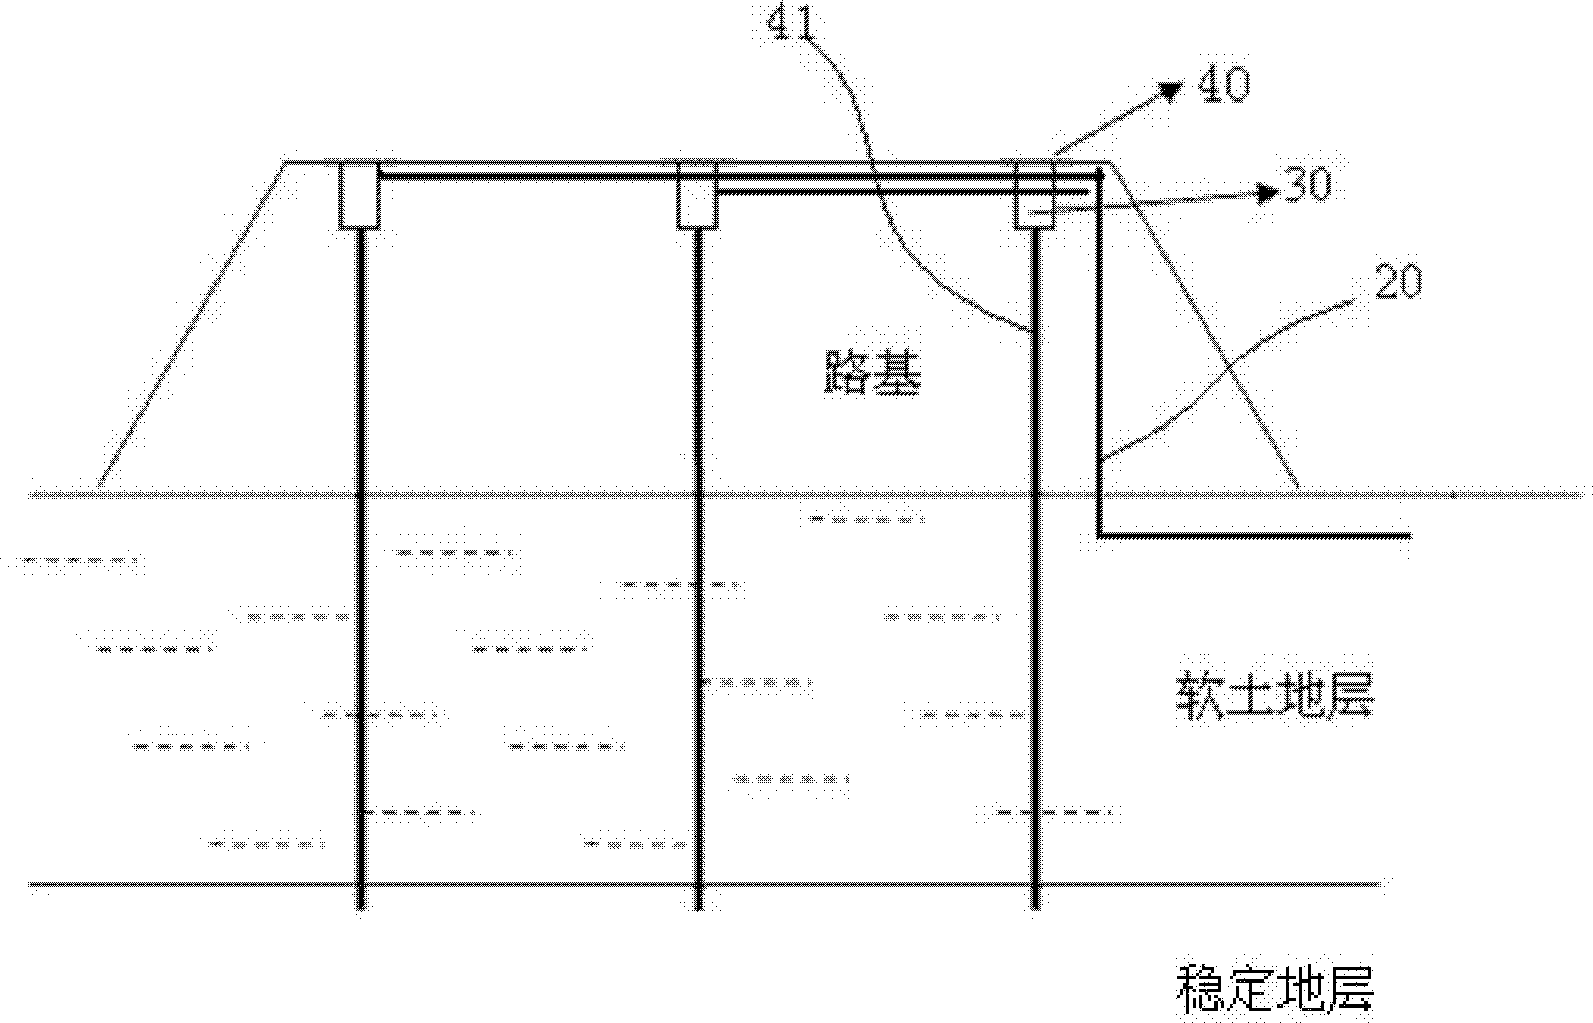 Remote automatic monitoring system for subgrade settlement and monitoring method thereof